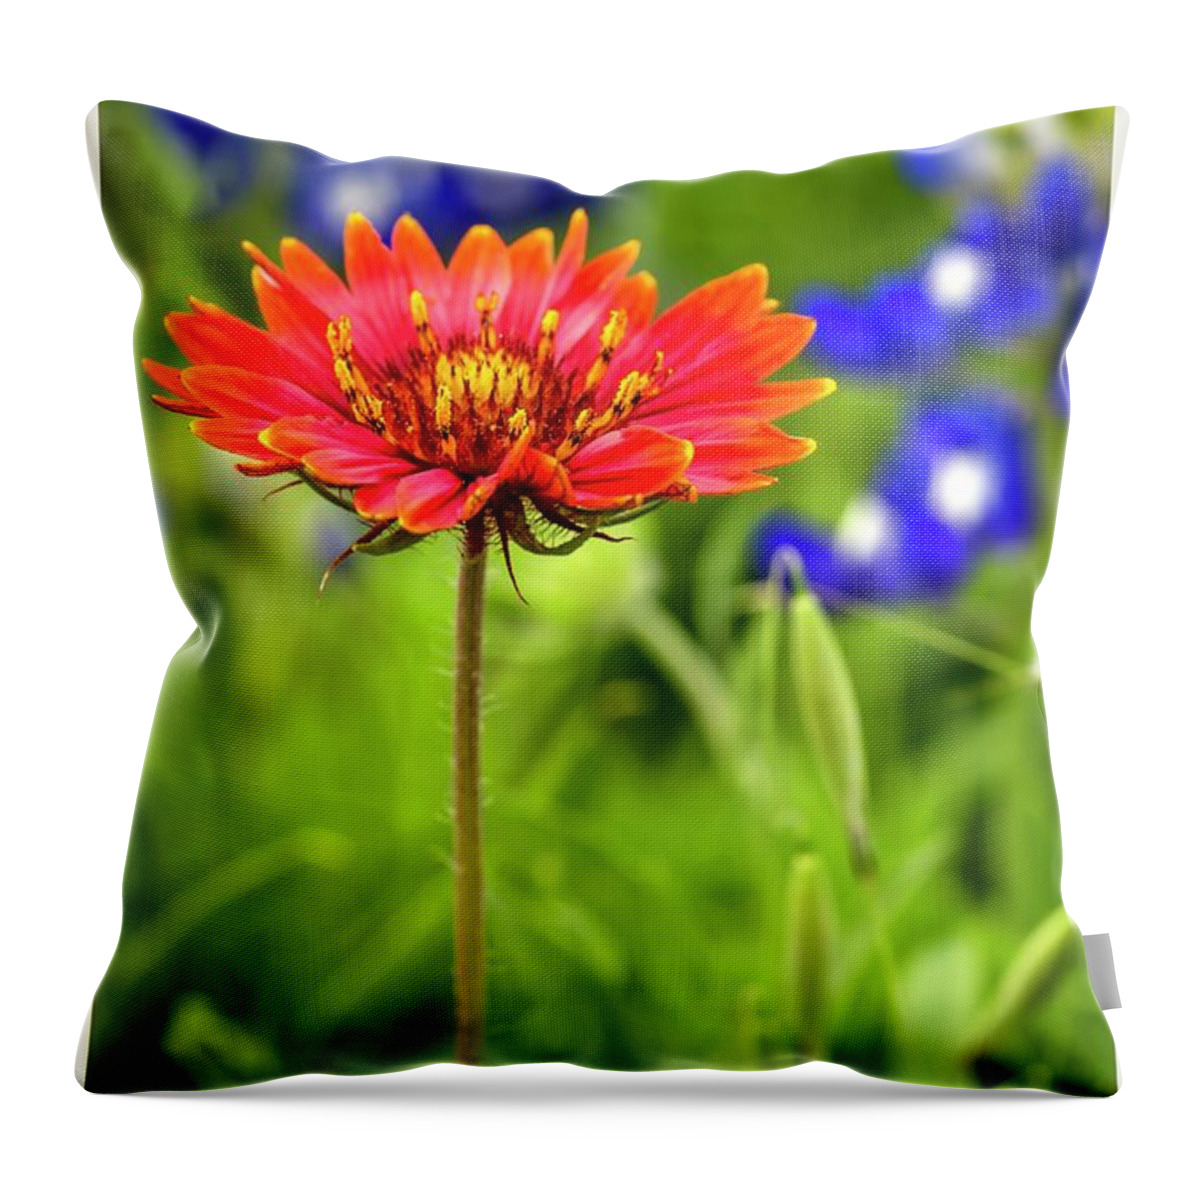 Texas Throw Pillow featuring the photograph Texas Party Girl by Harriet Feagin